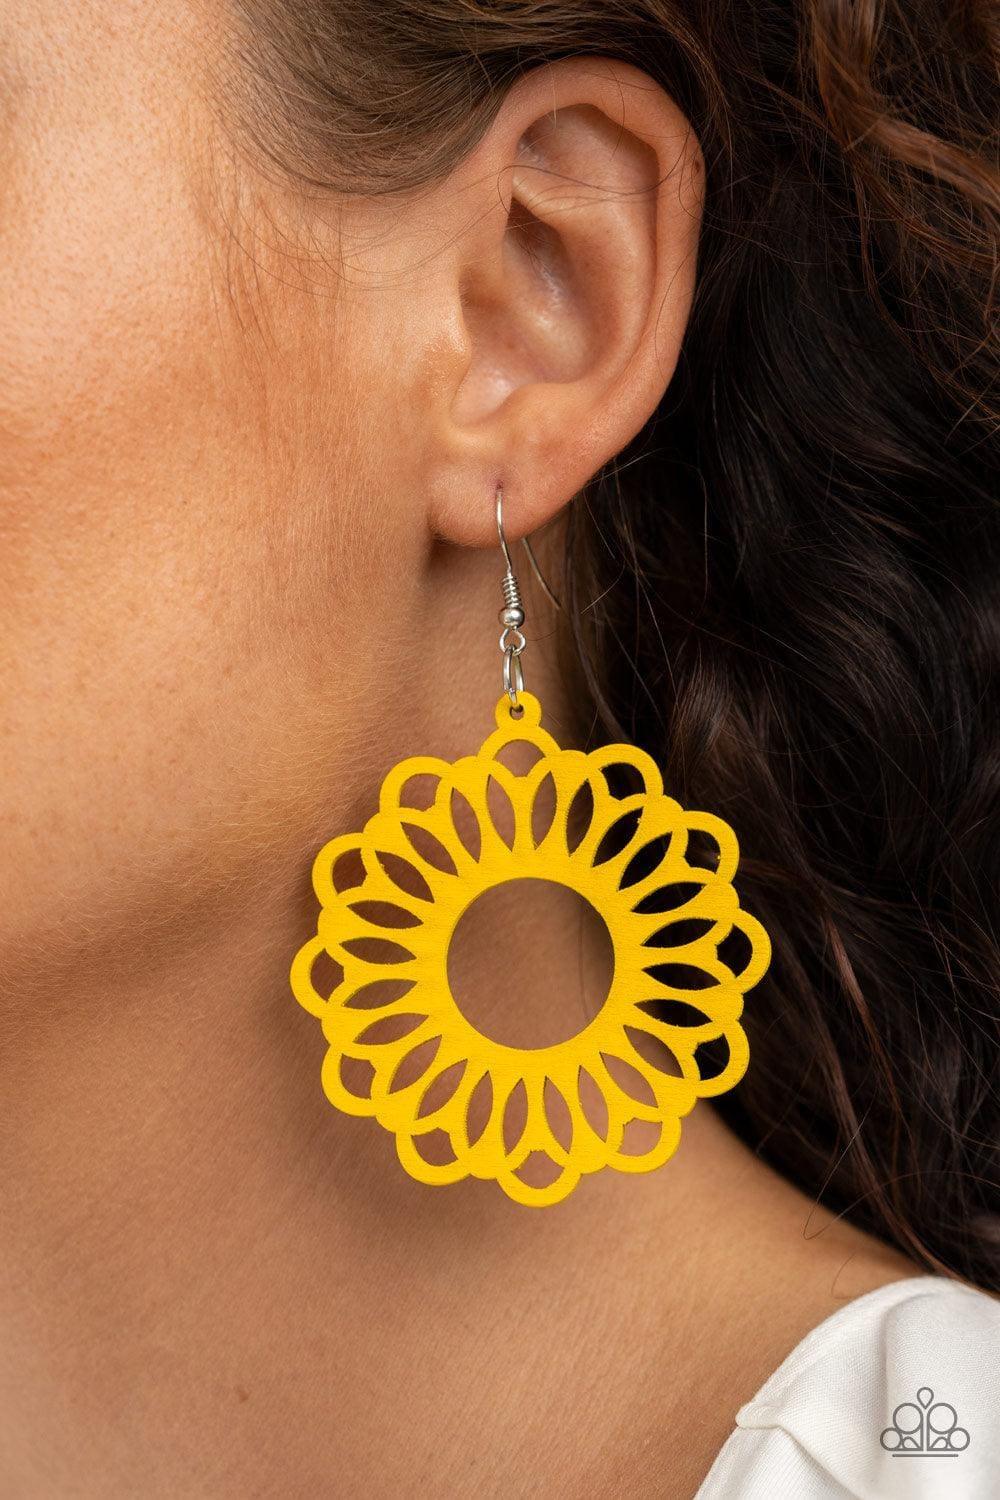 Paparazzi Accessories - Dominican Daisy - Yellow Earrings - Bling by JessieK